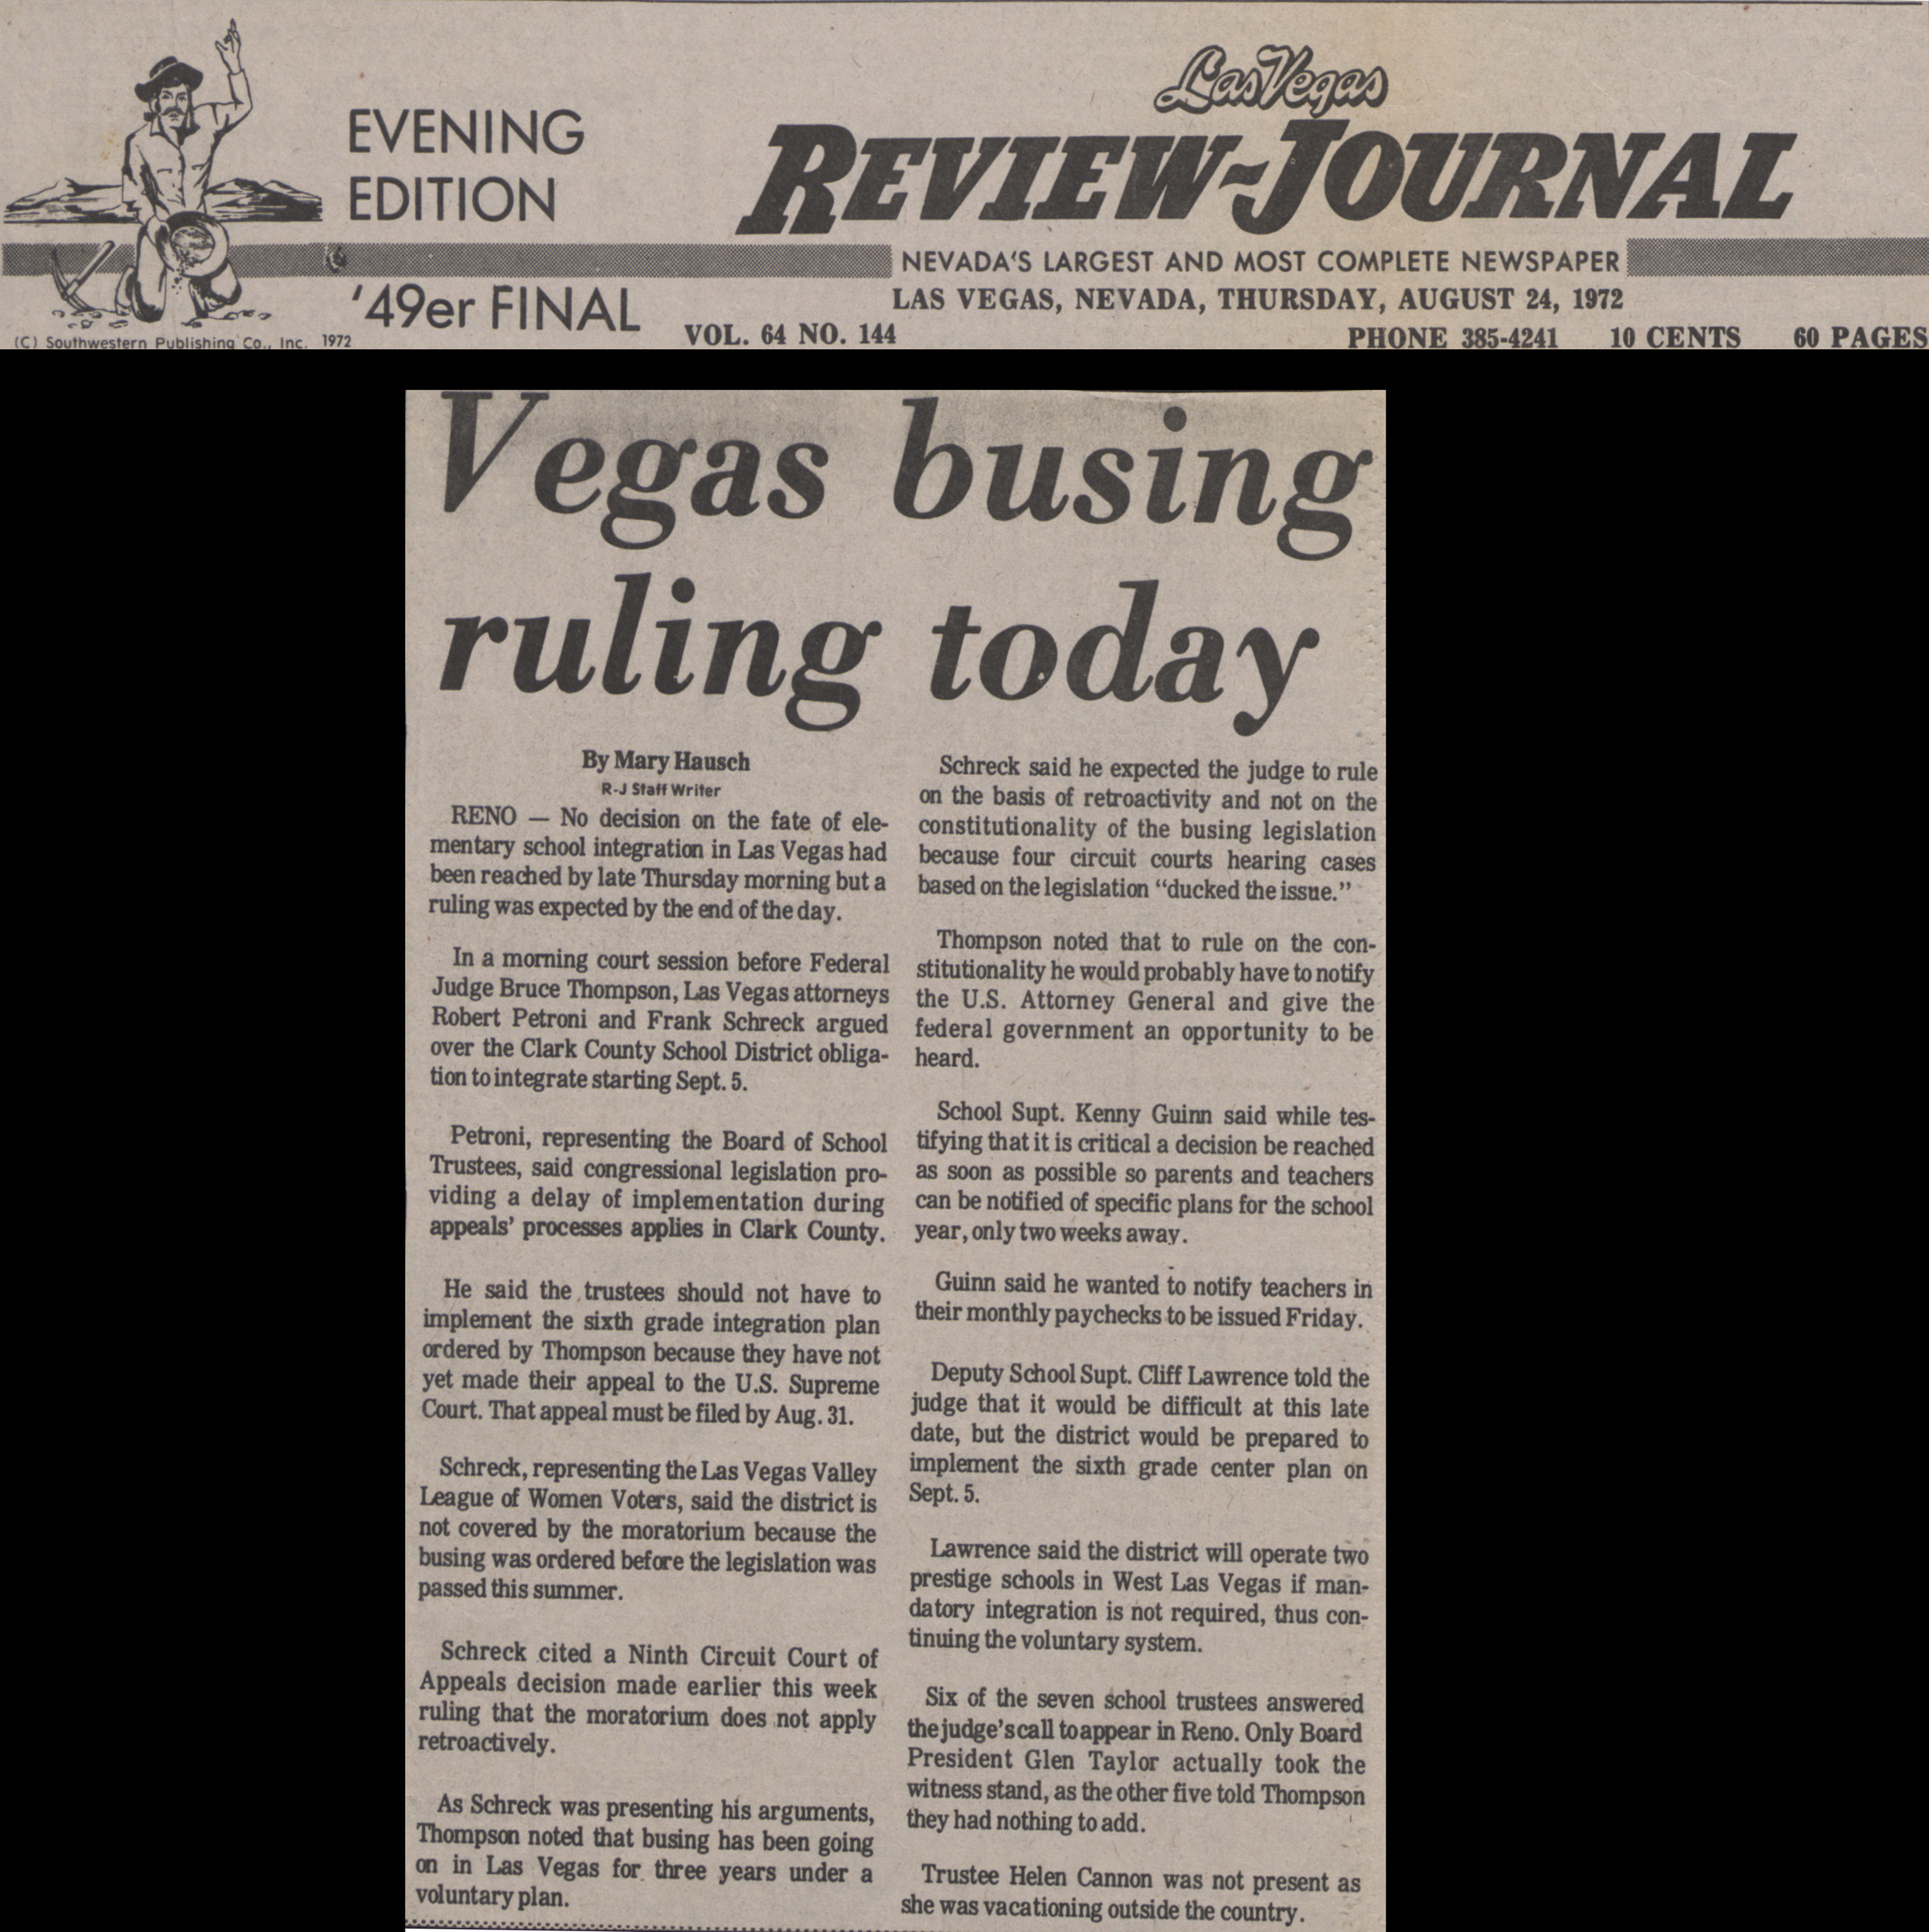 Newspaper clipping, Vegas busing ruling today, Las Vegas Review-Journal, evening edition, August 24, 1972